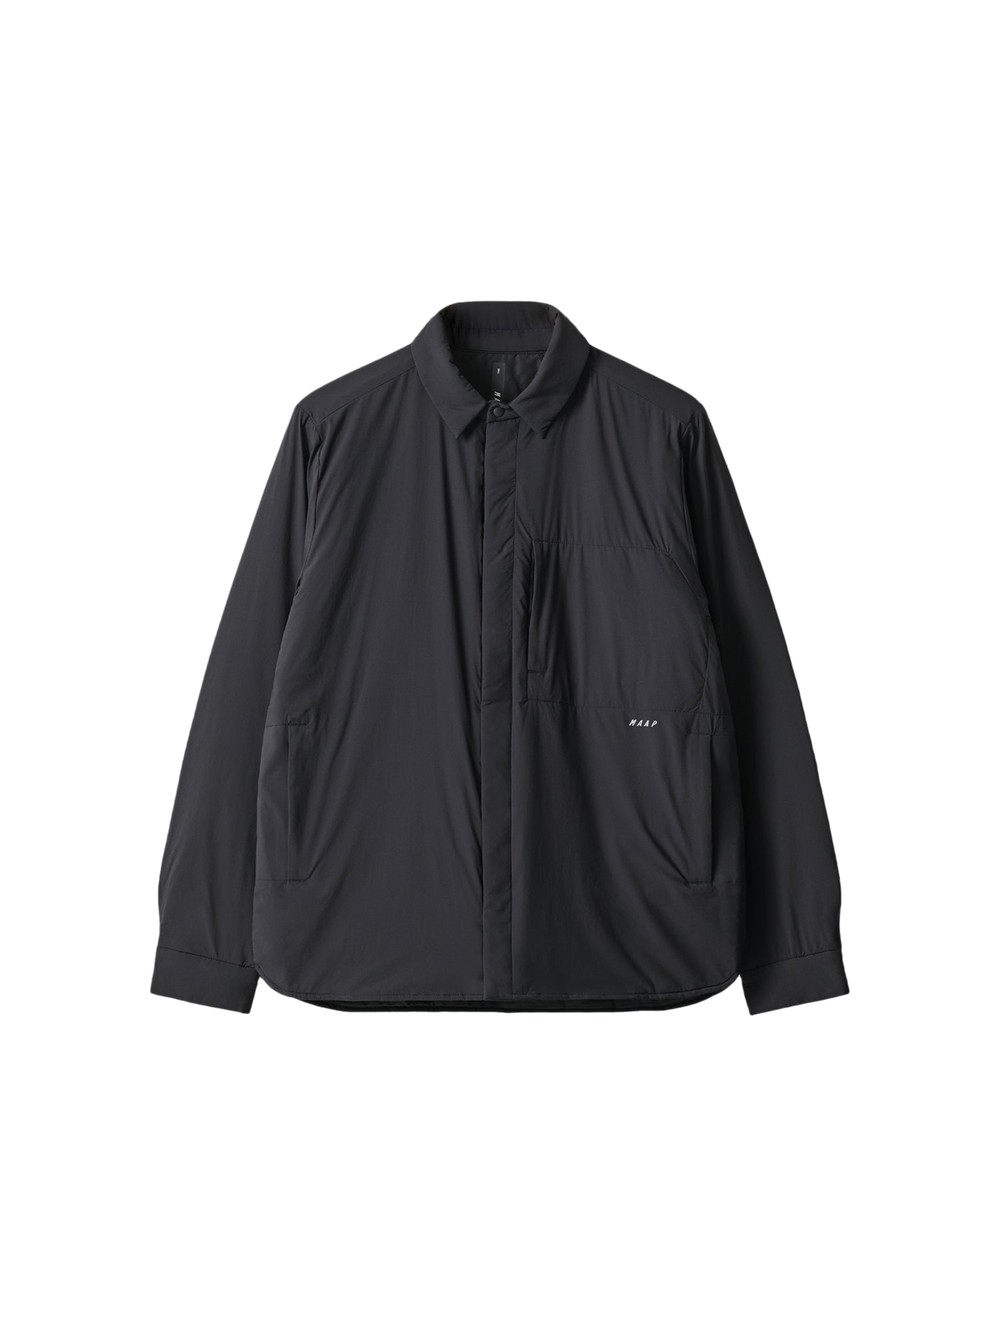 Product Image for Padded Overshirt